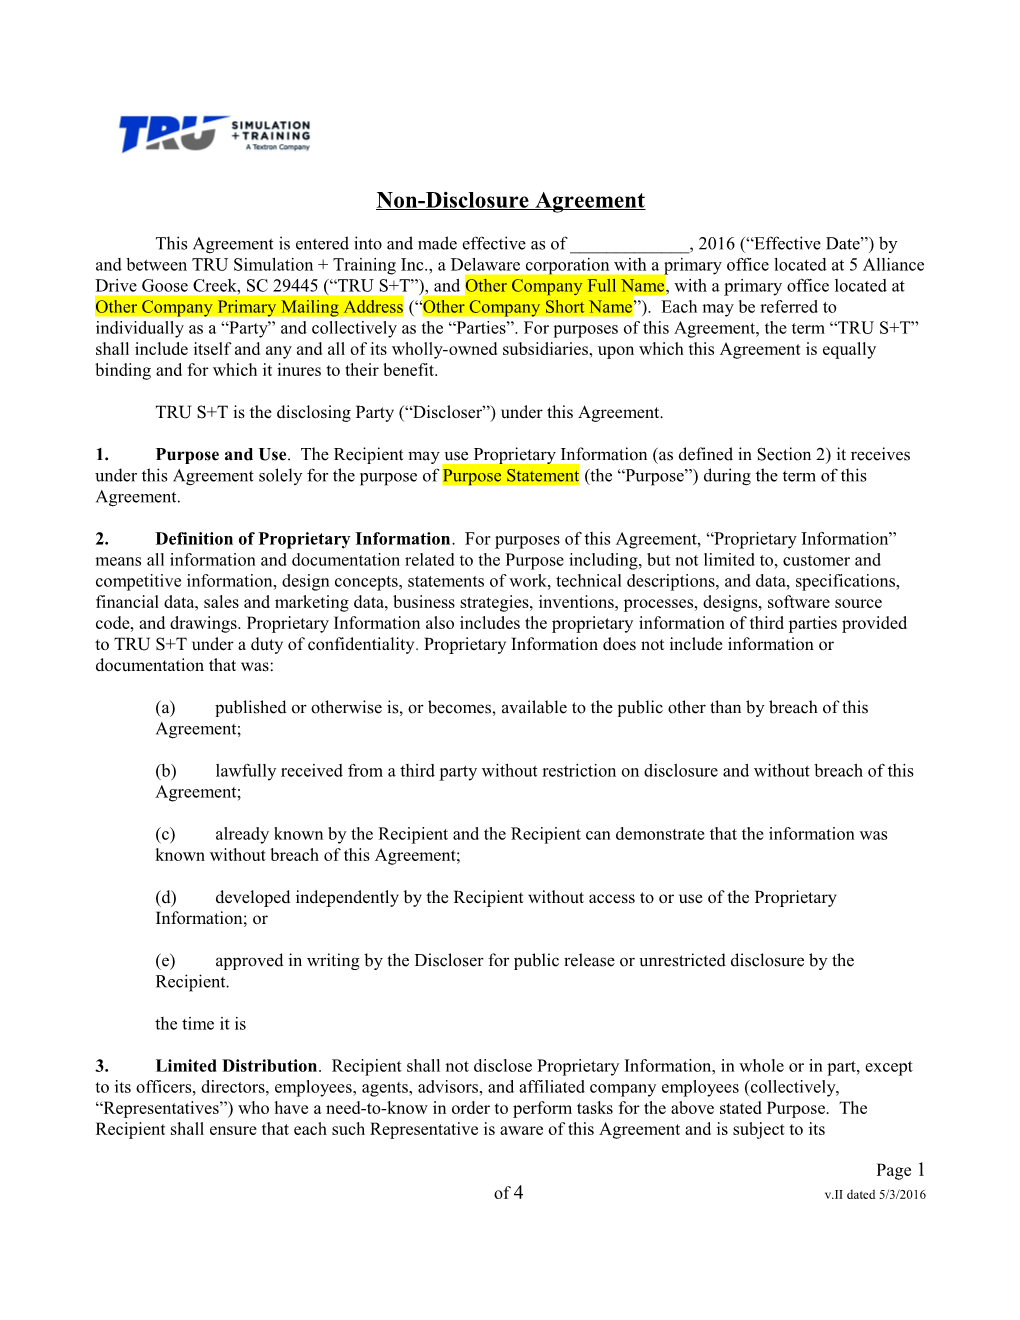 Proprietary Information Non-Disclosure Agreement